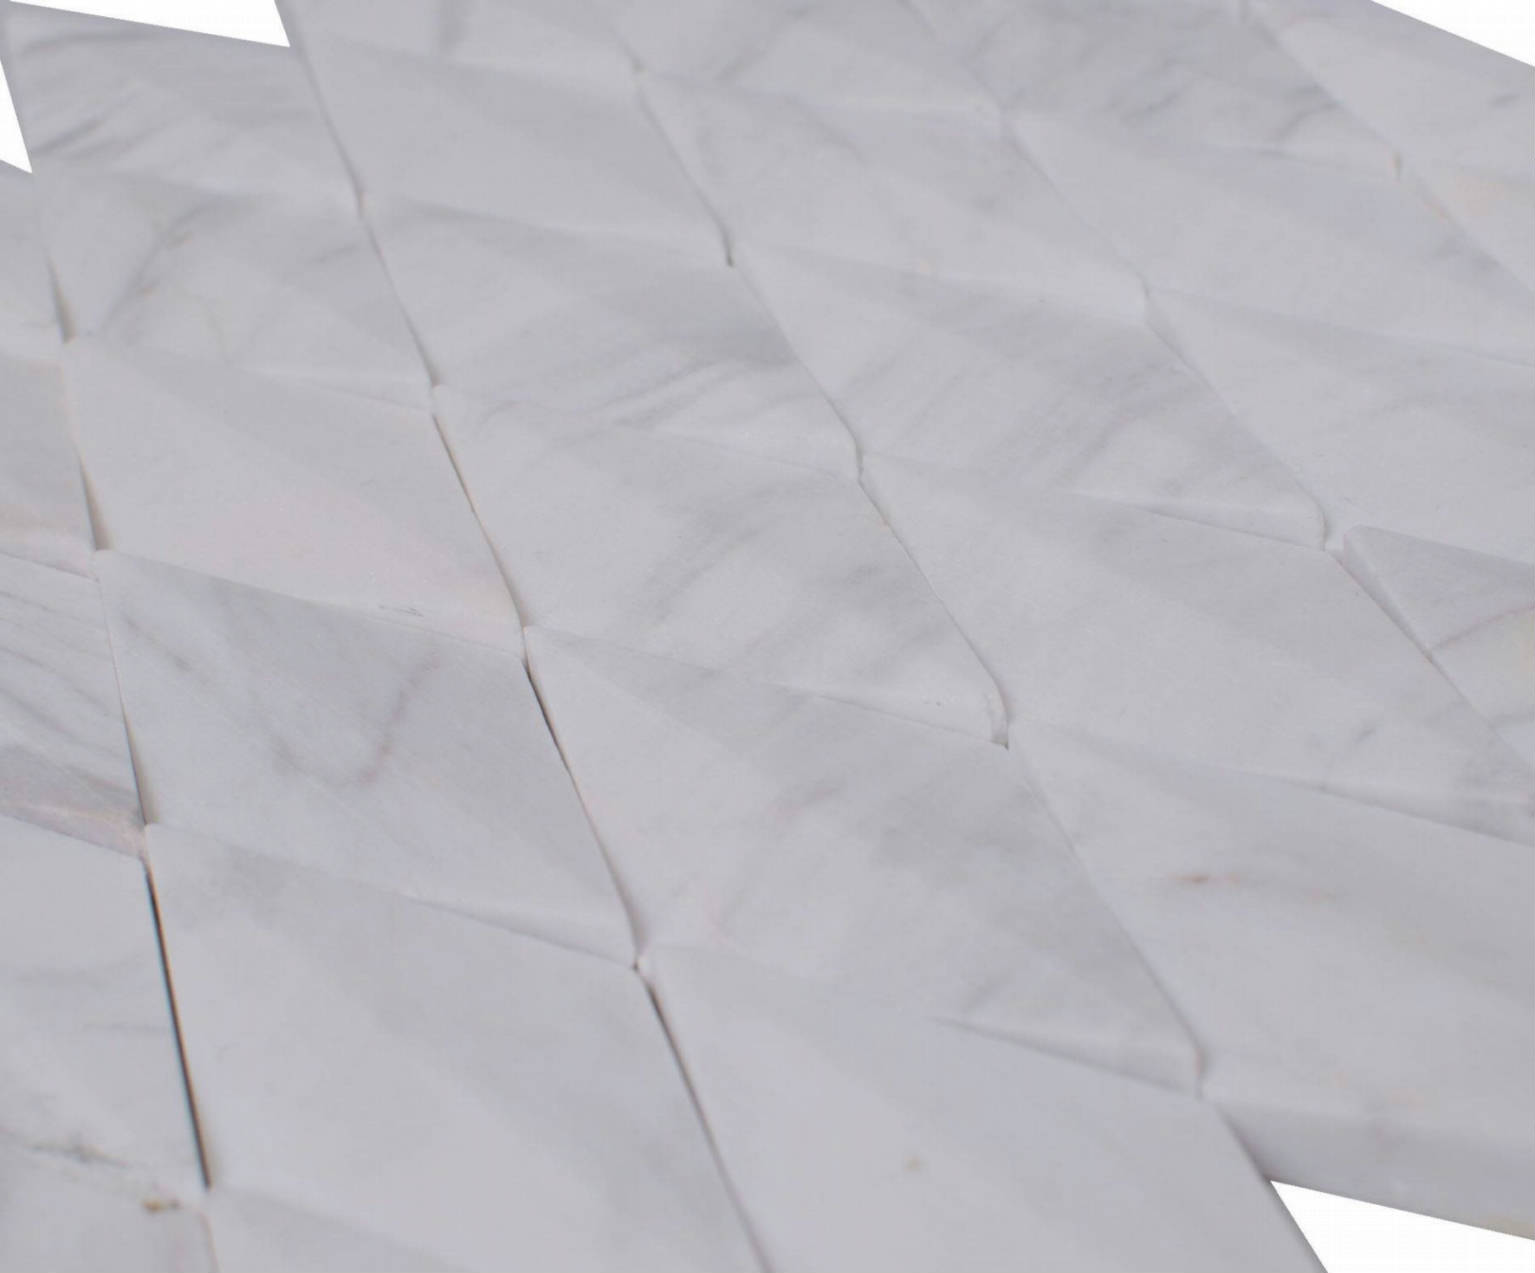 B001 | Stones And More | Finest selection of Mosaics, Glass, Tile and Stone